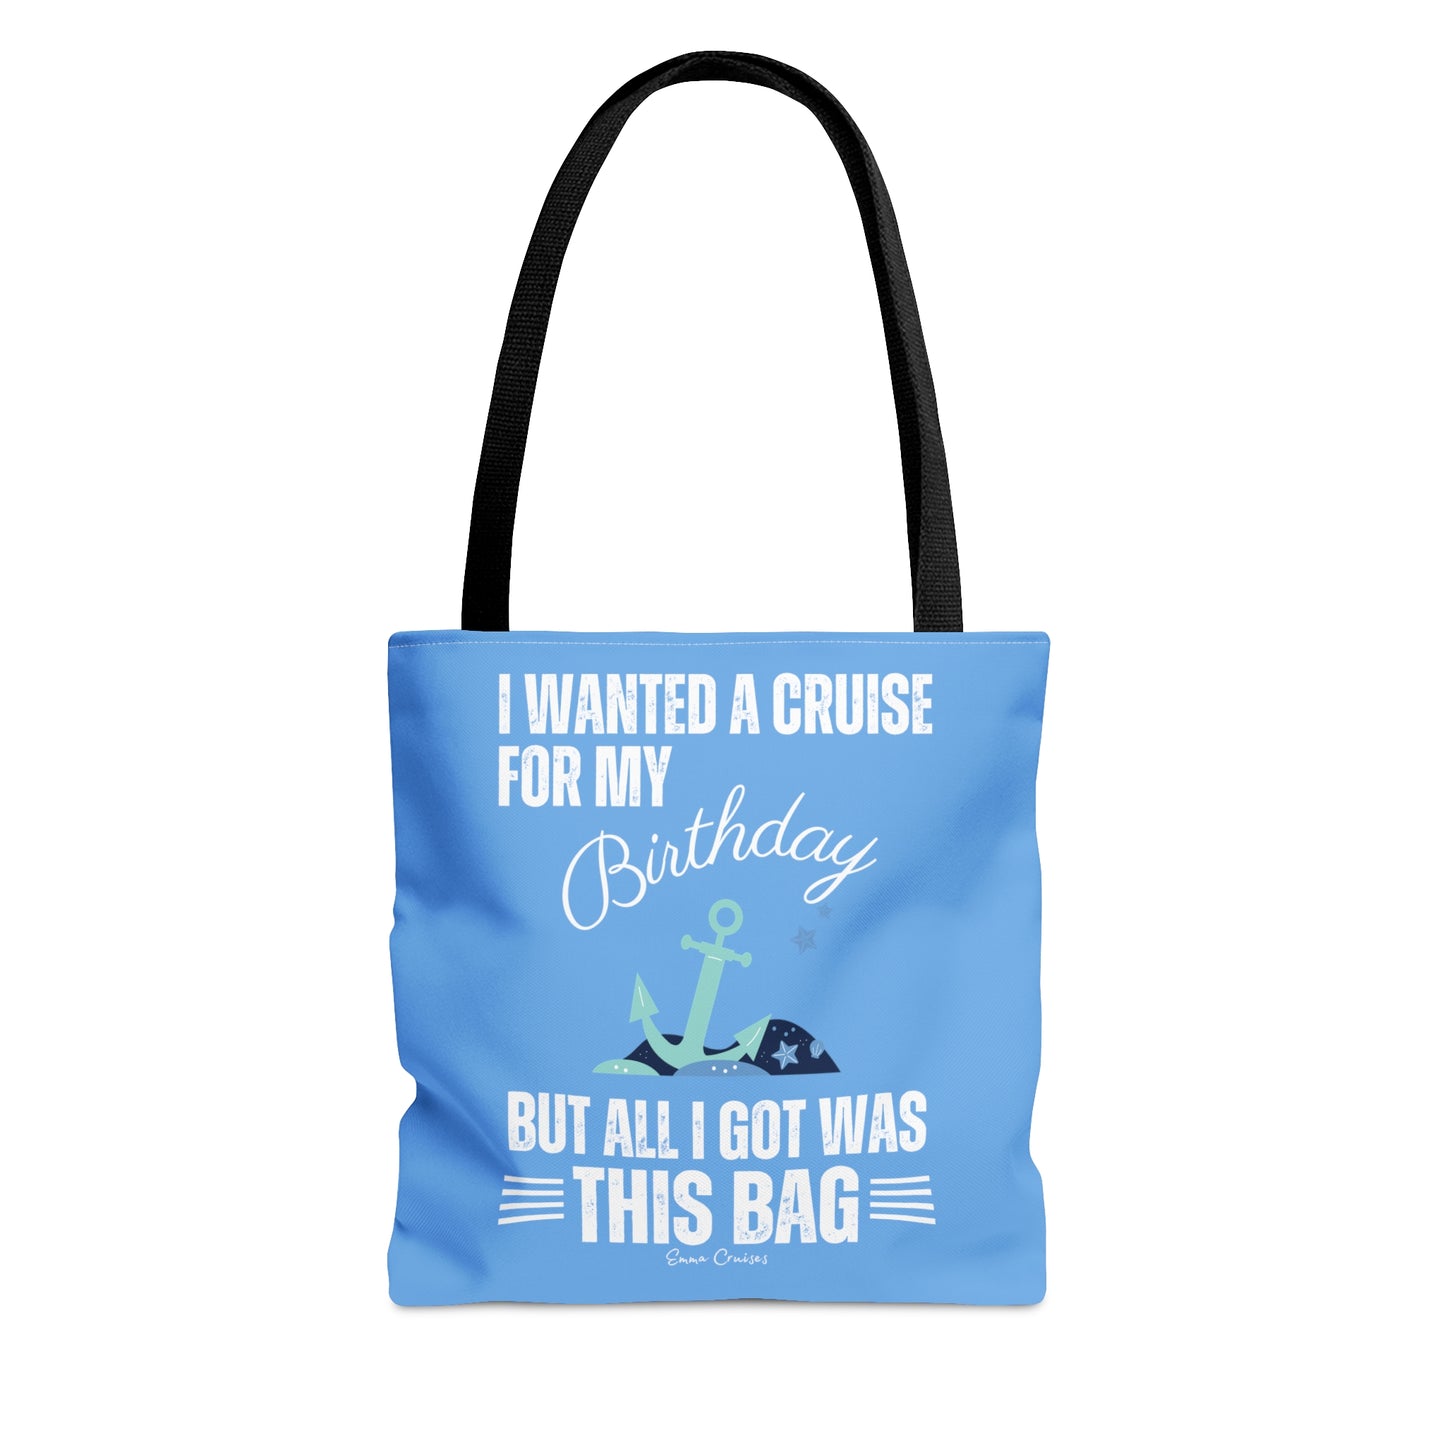 I Wanted a Cruise for My Birthday - Bag